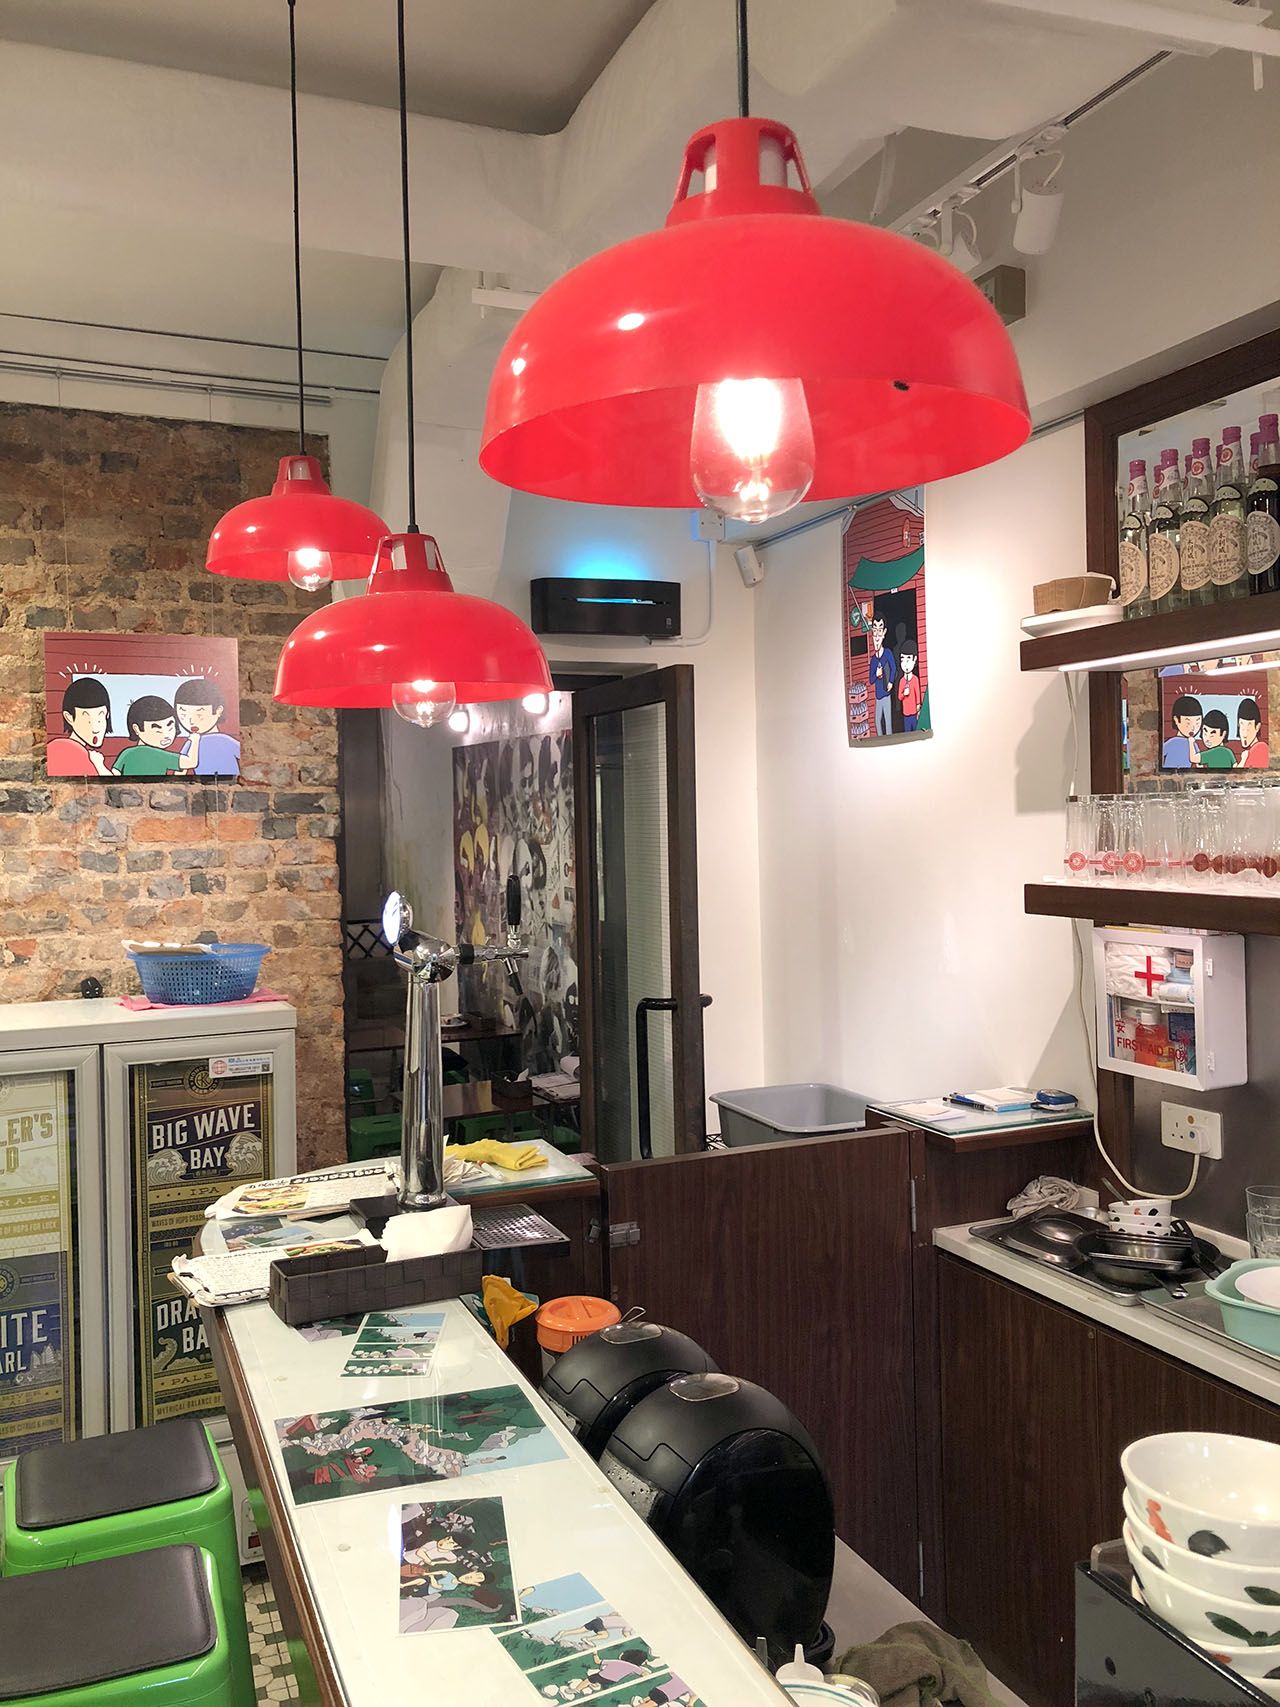 Inside view of the cafe with signature red half-circle hanging lanterns with printed panels from the comic on the walls and on the glass tables